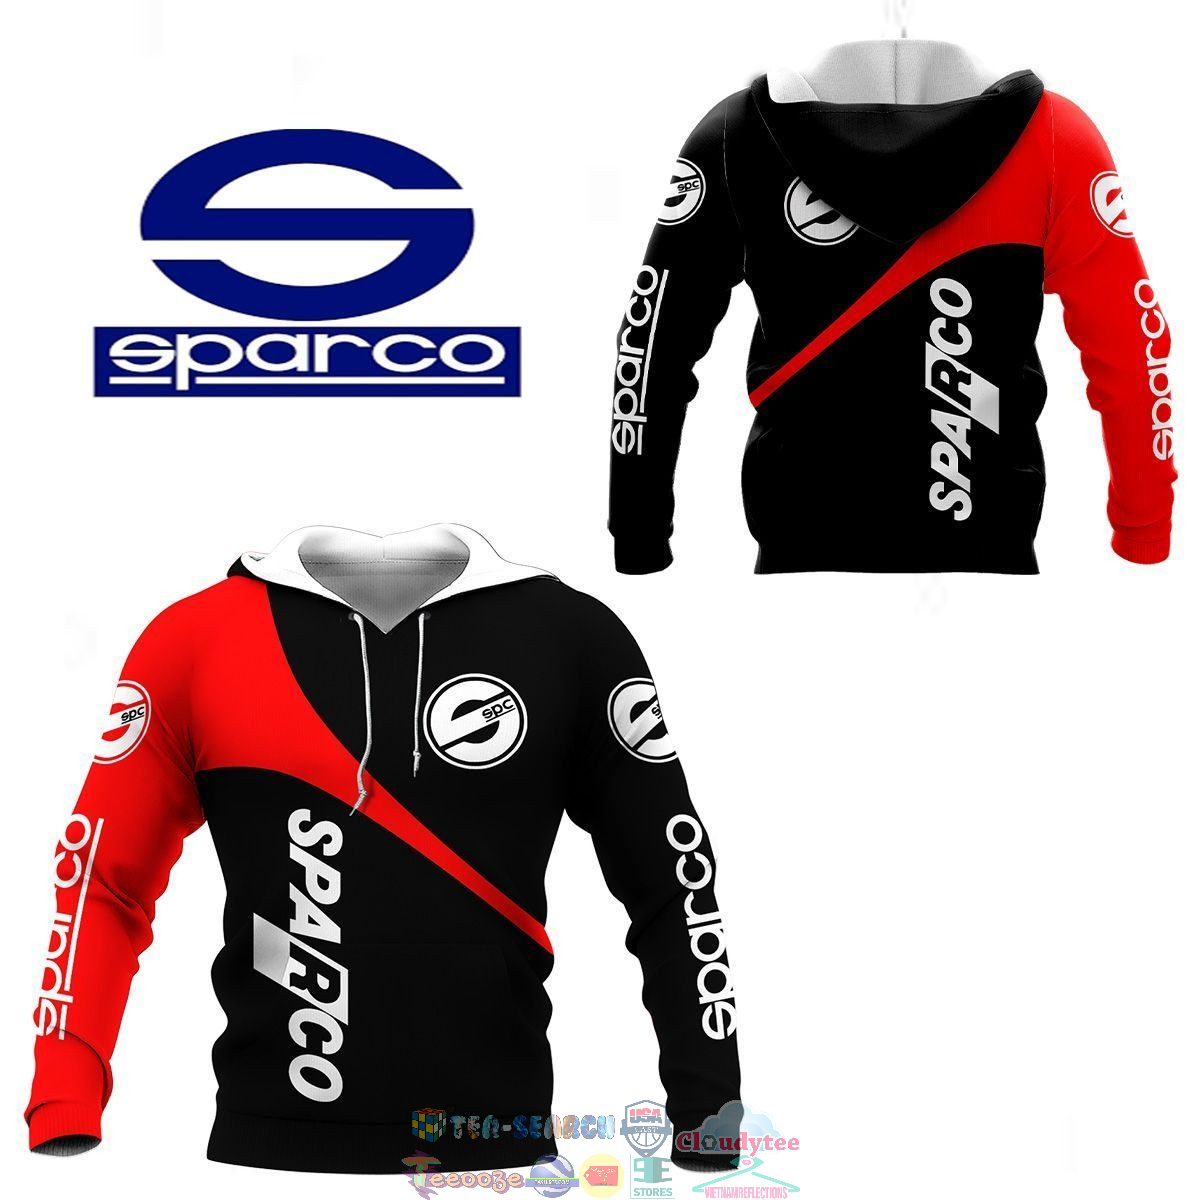 Sparco ver 31 3D hoodie and t-shirt